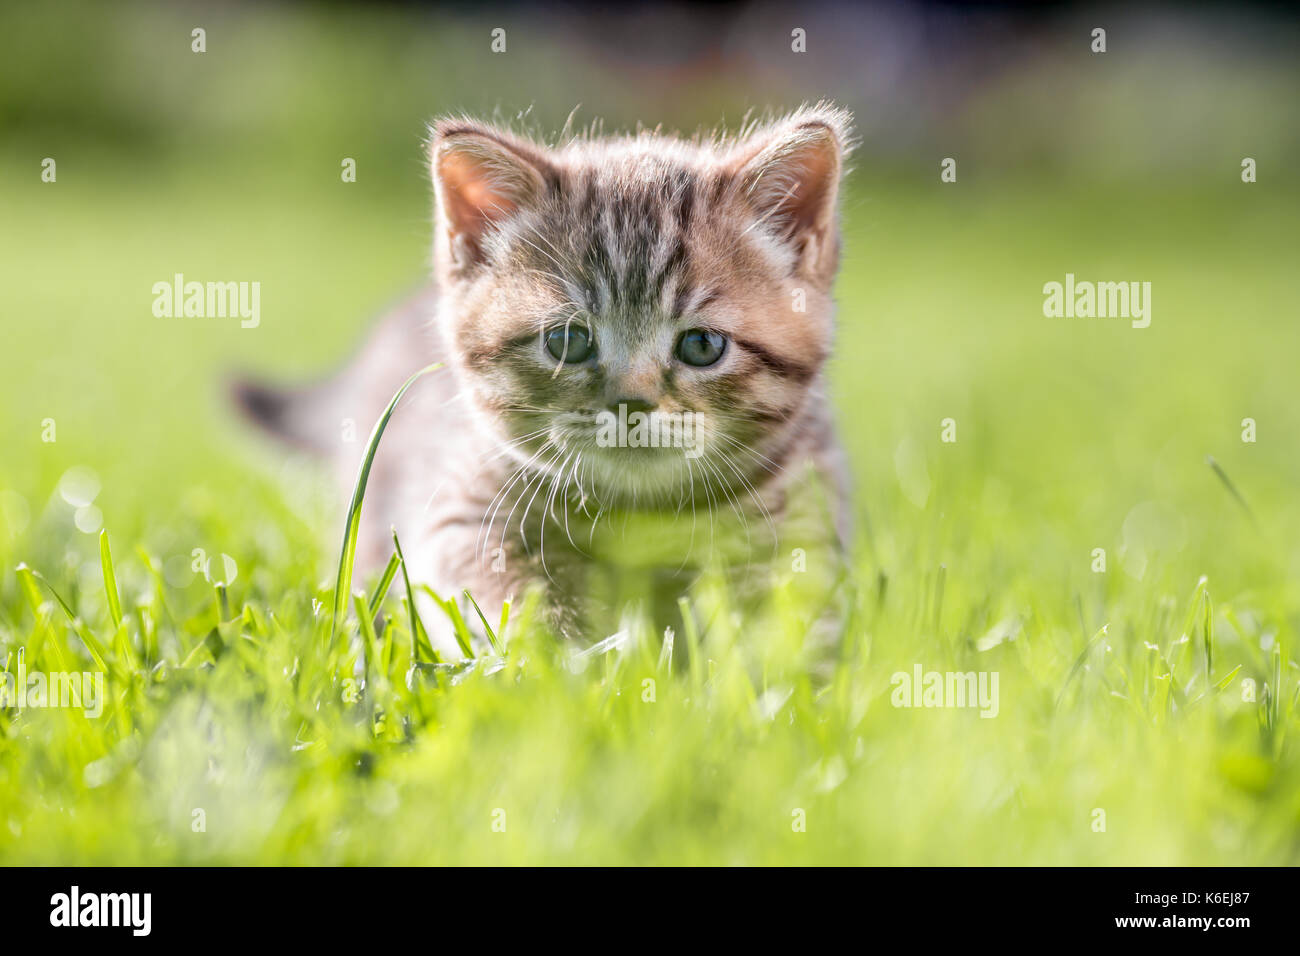 Young cat in green grass Stock Photo